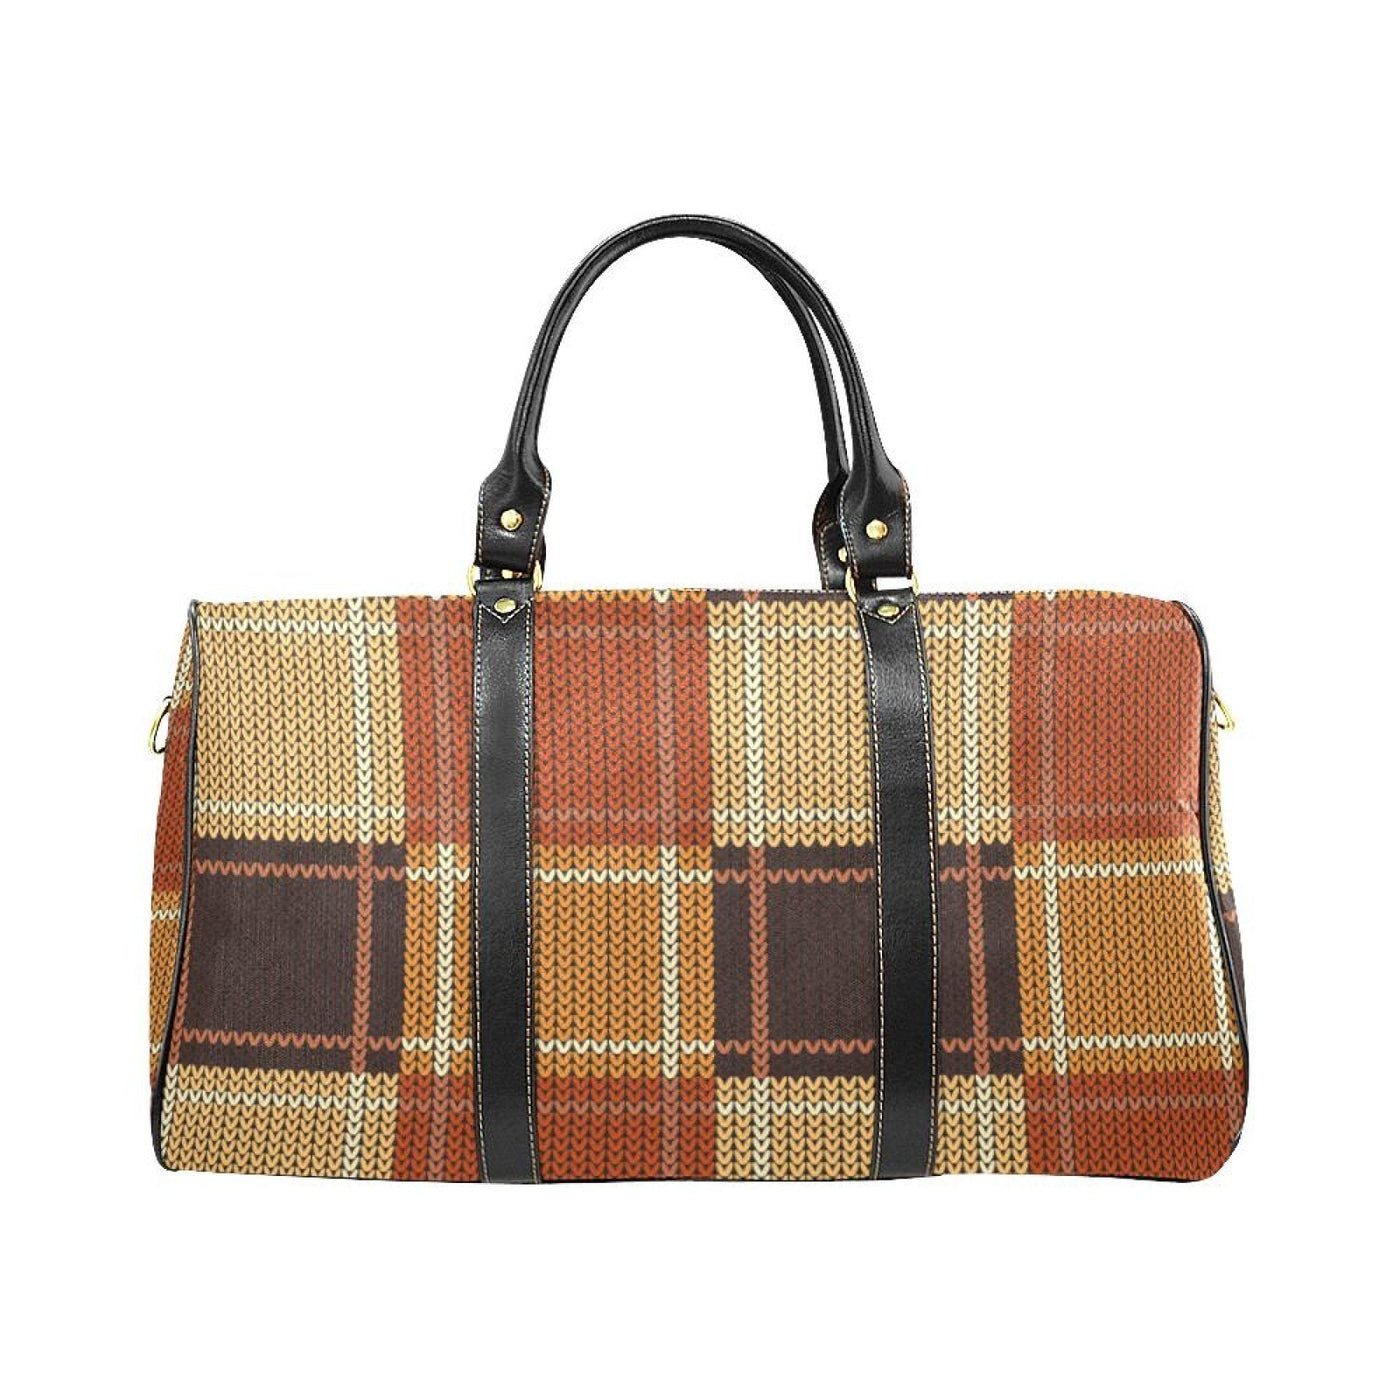 Travel Bag Leather Carry On Large Luggage Bag Brown Checker - Bags | Travel Bags